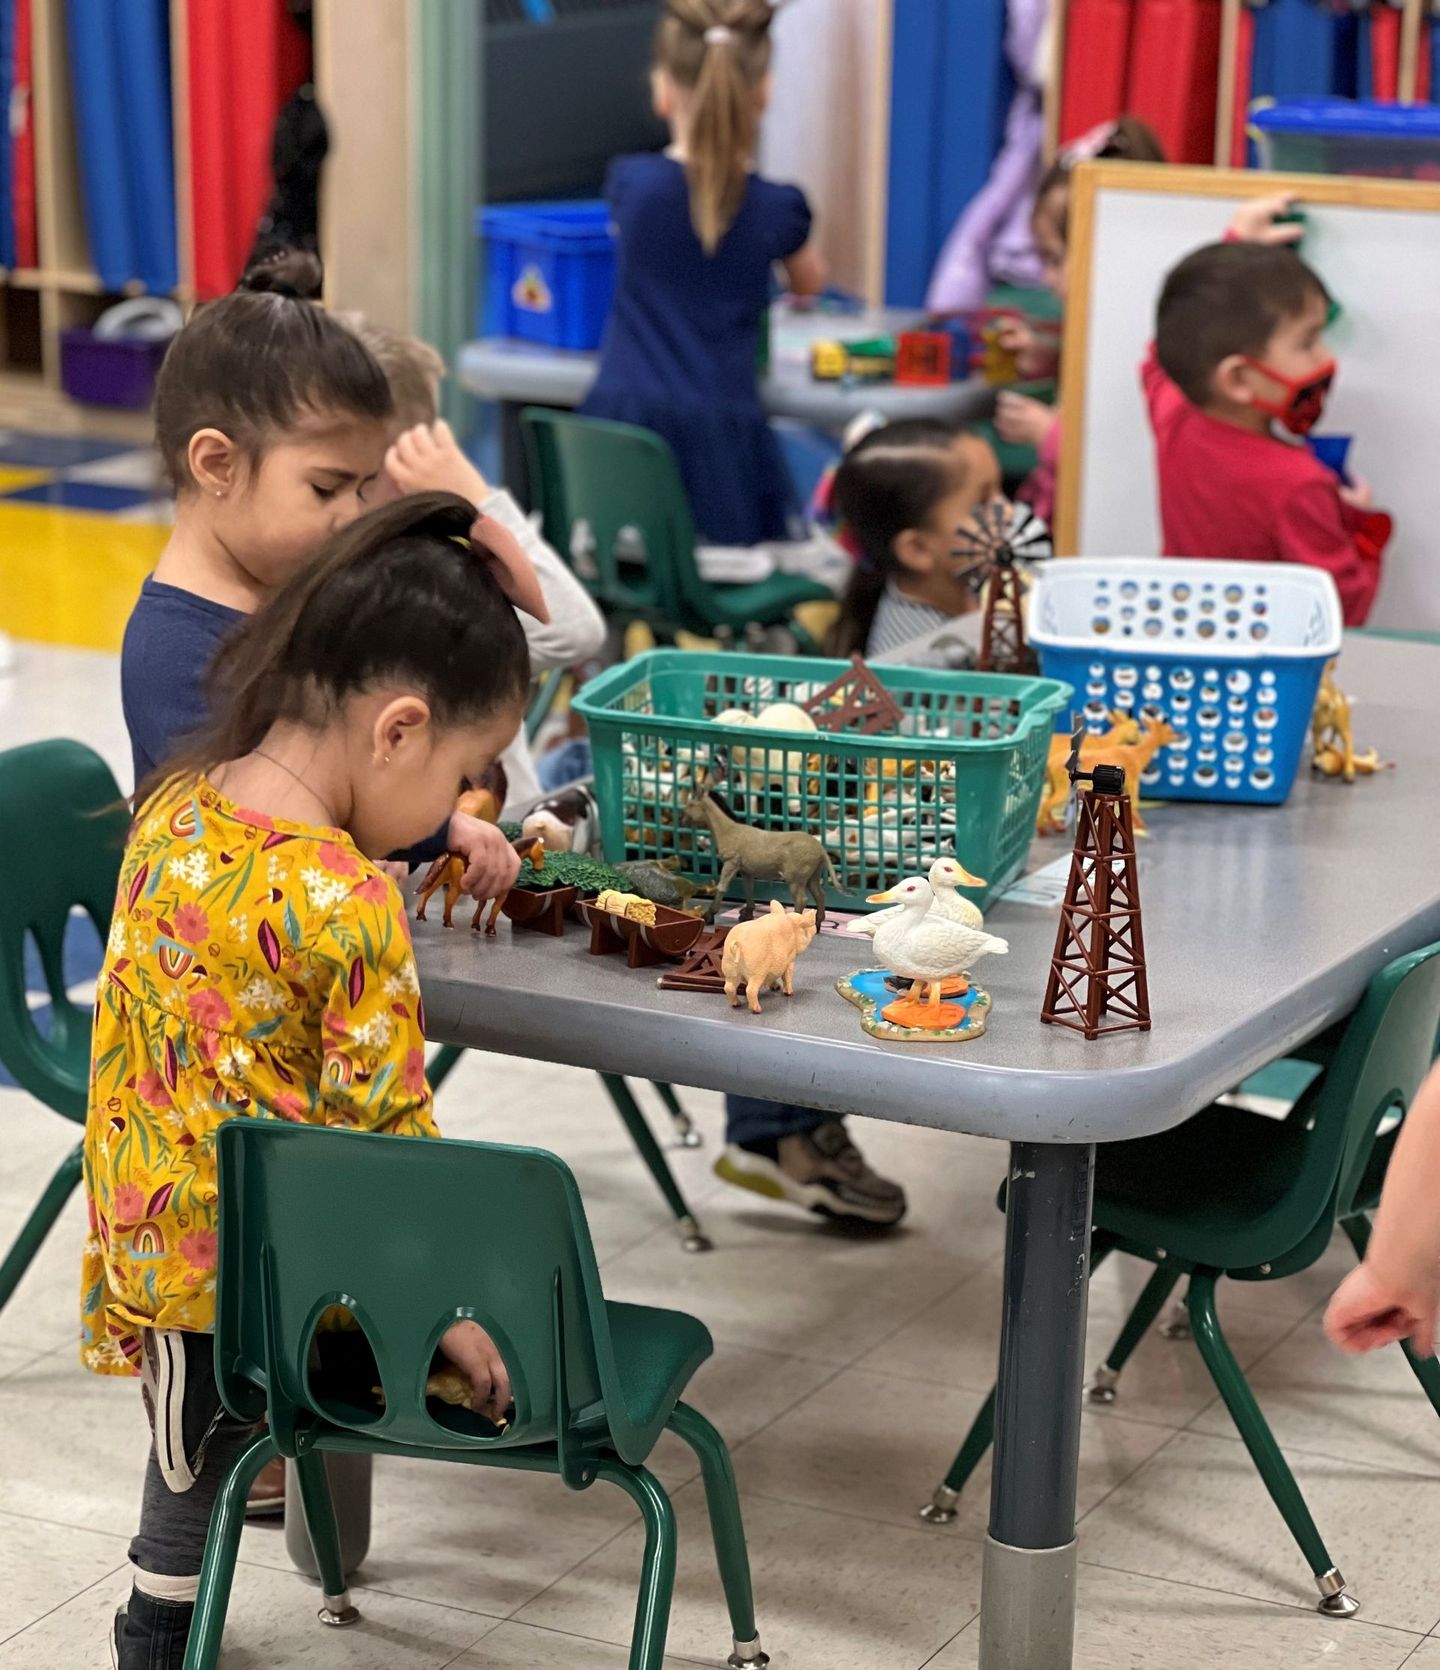 a group of children are playing with toys at a table